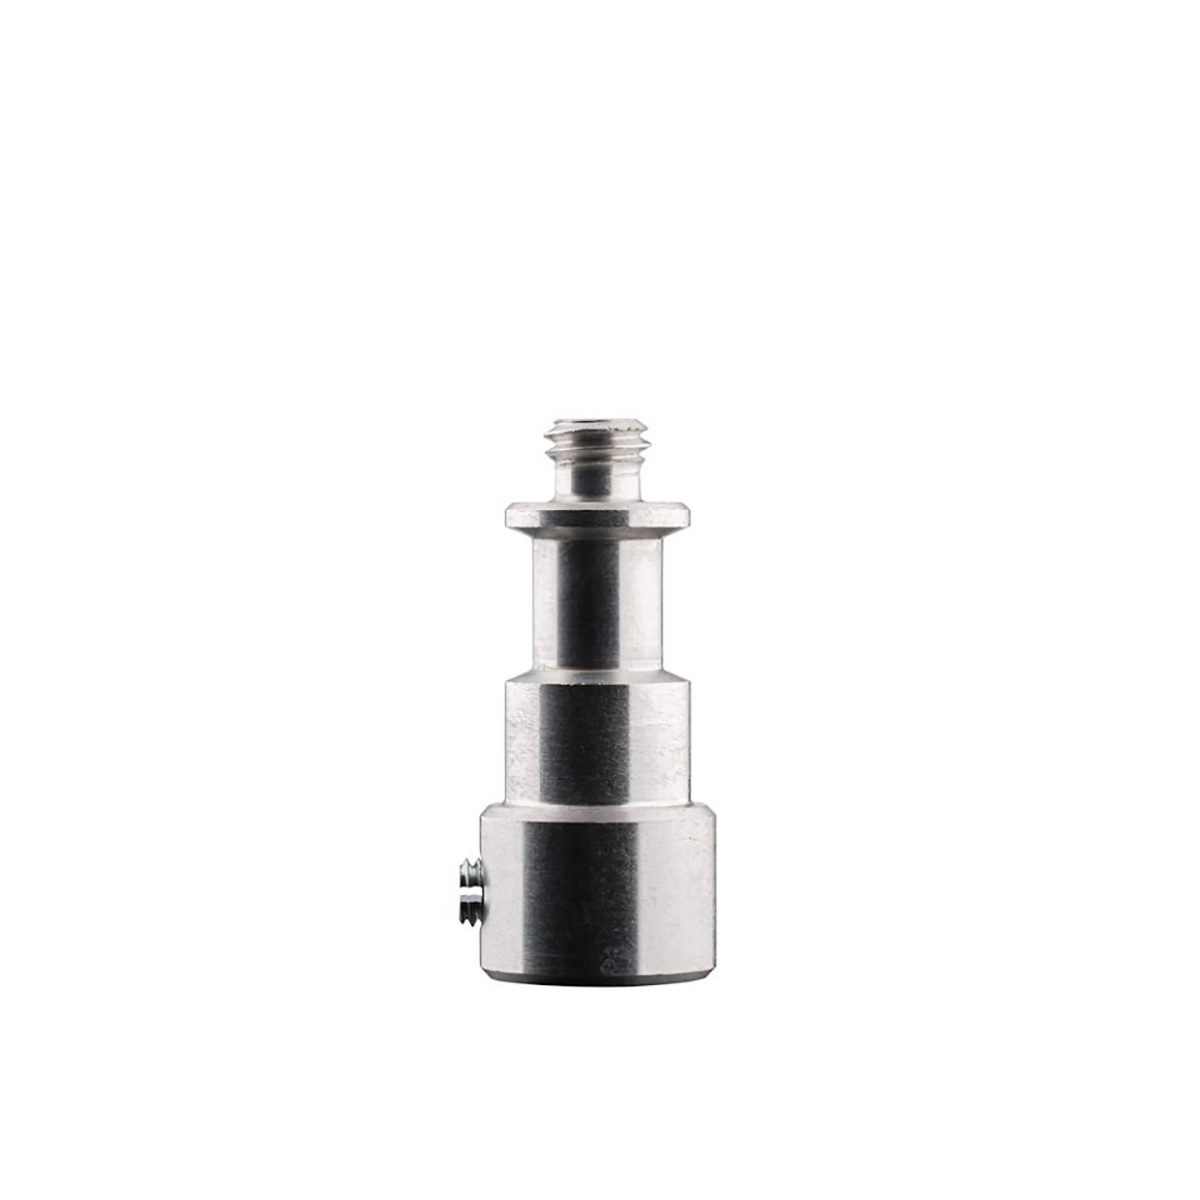 Manfrotto 182 Adapter 3/8 Stud to 5/8 Stud 3/8